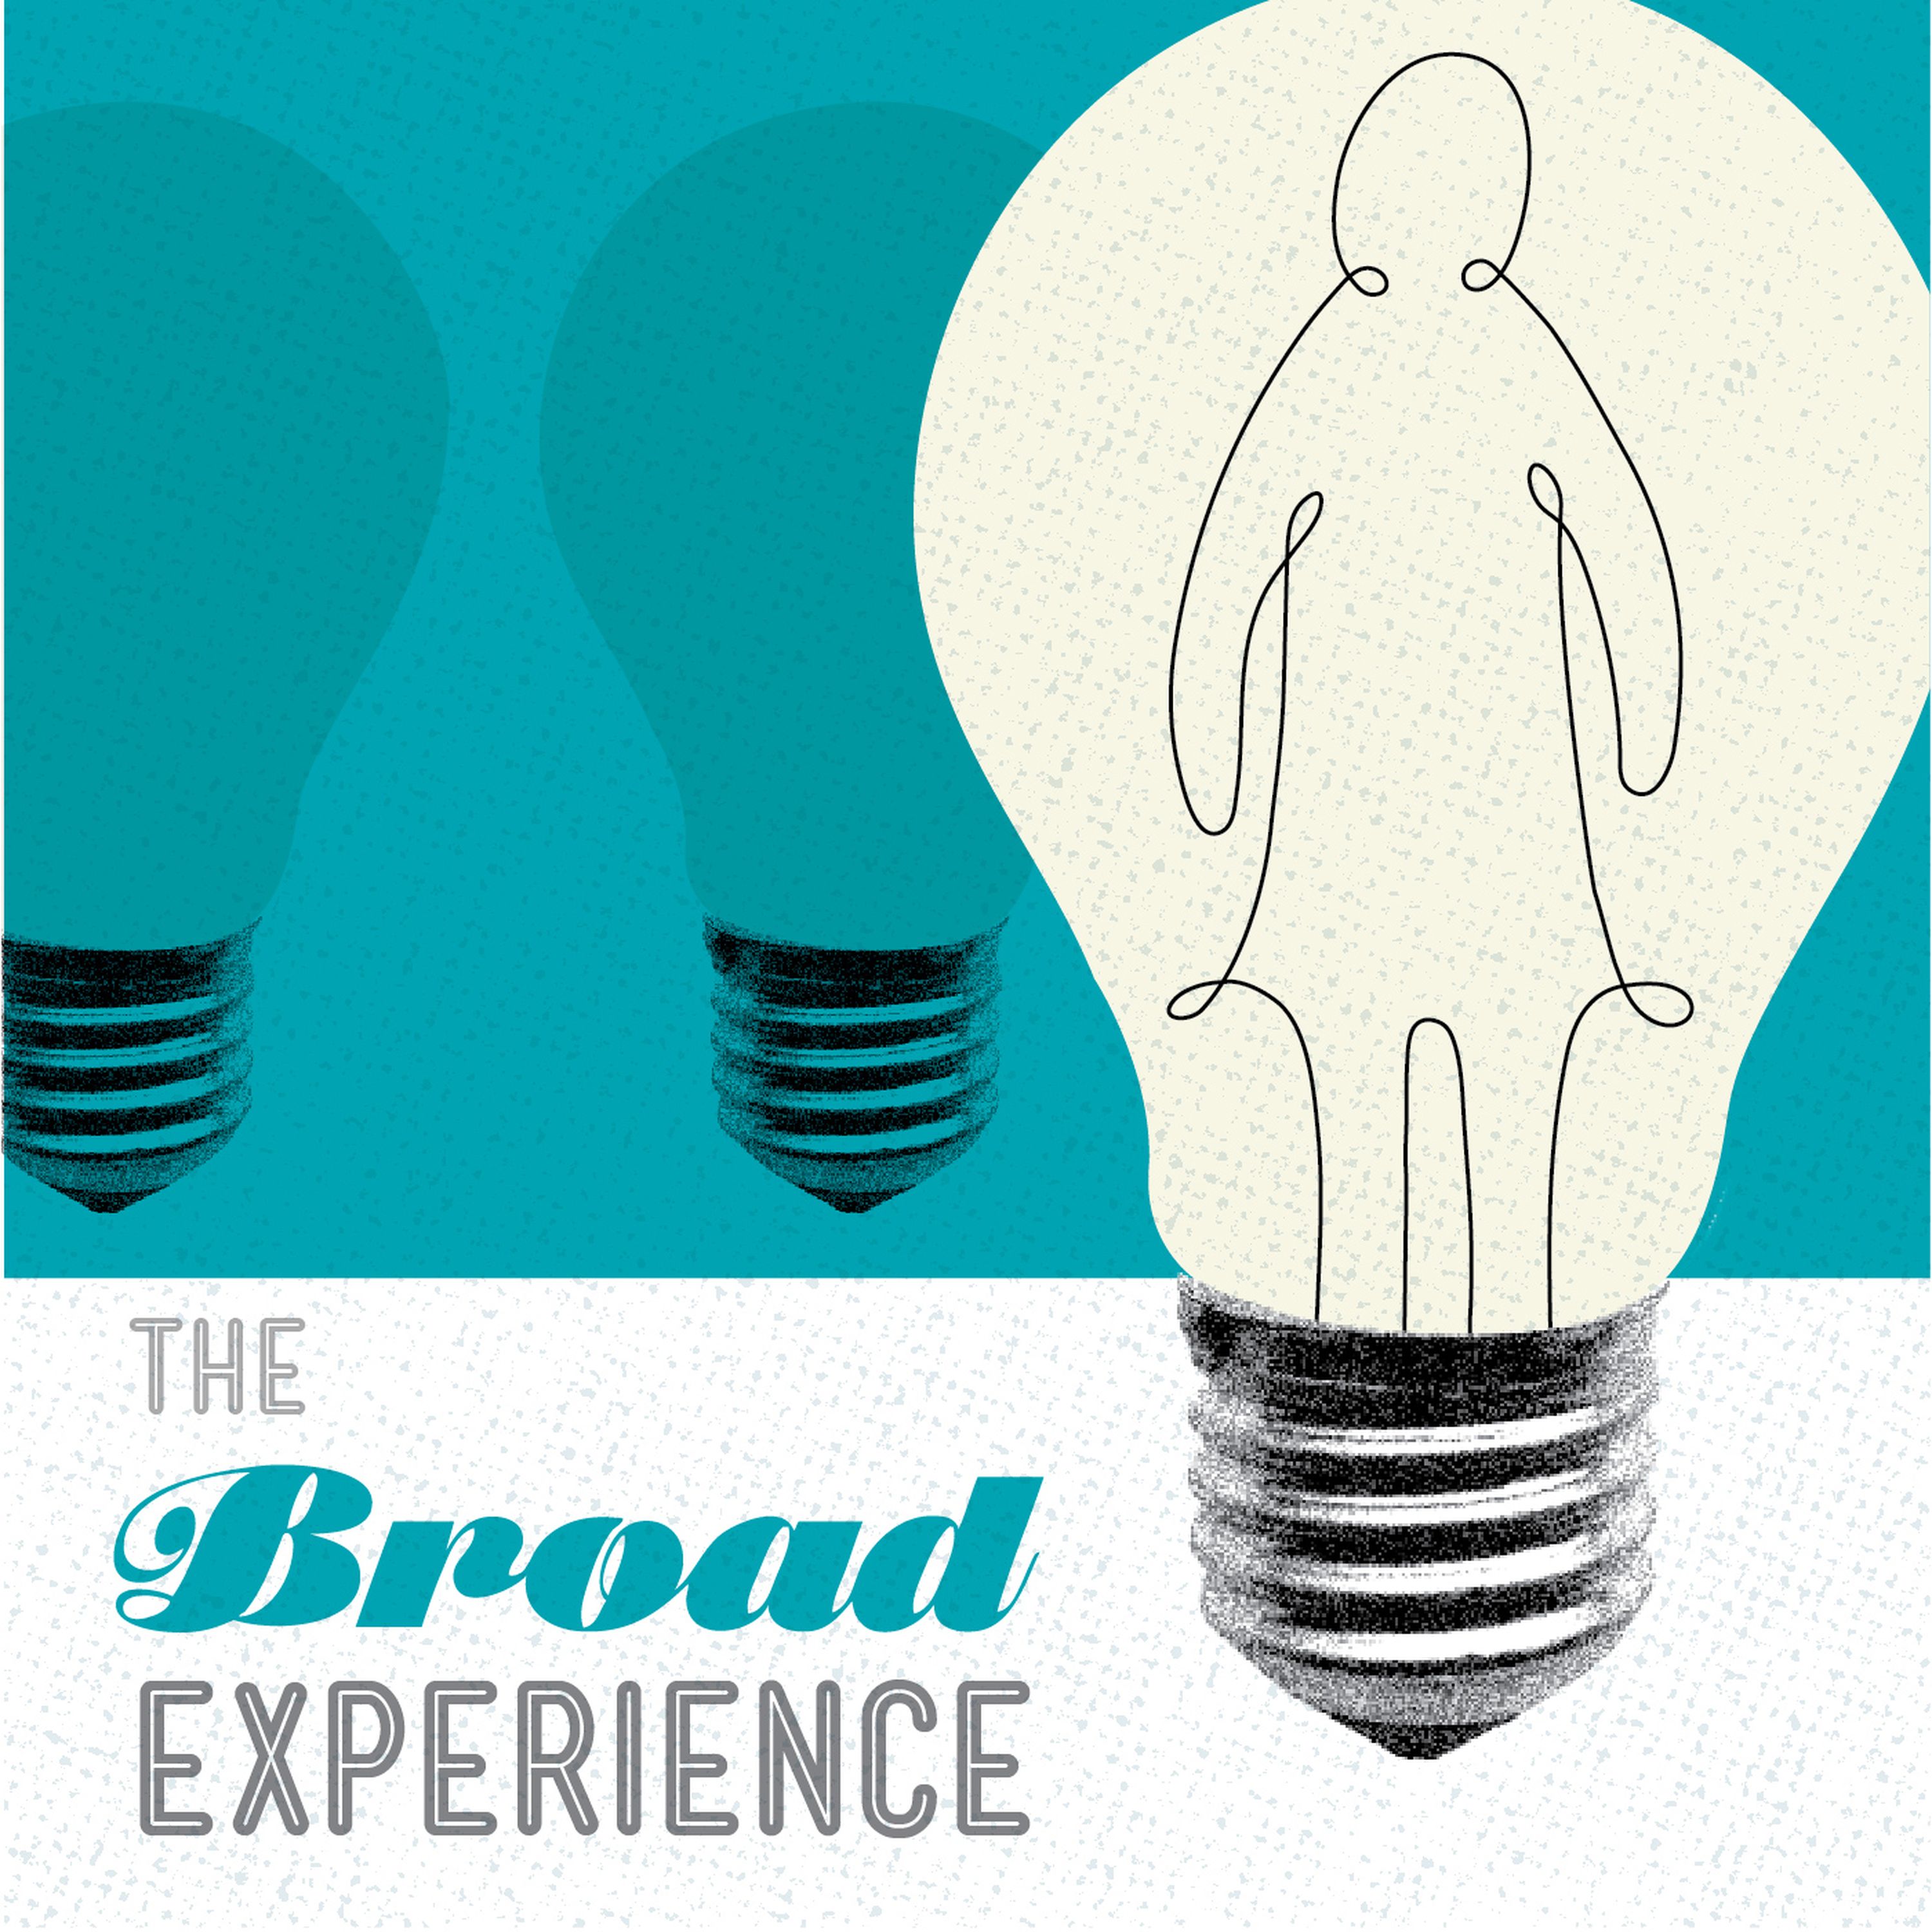 The Broad Experience 56: All the right moves